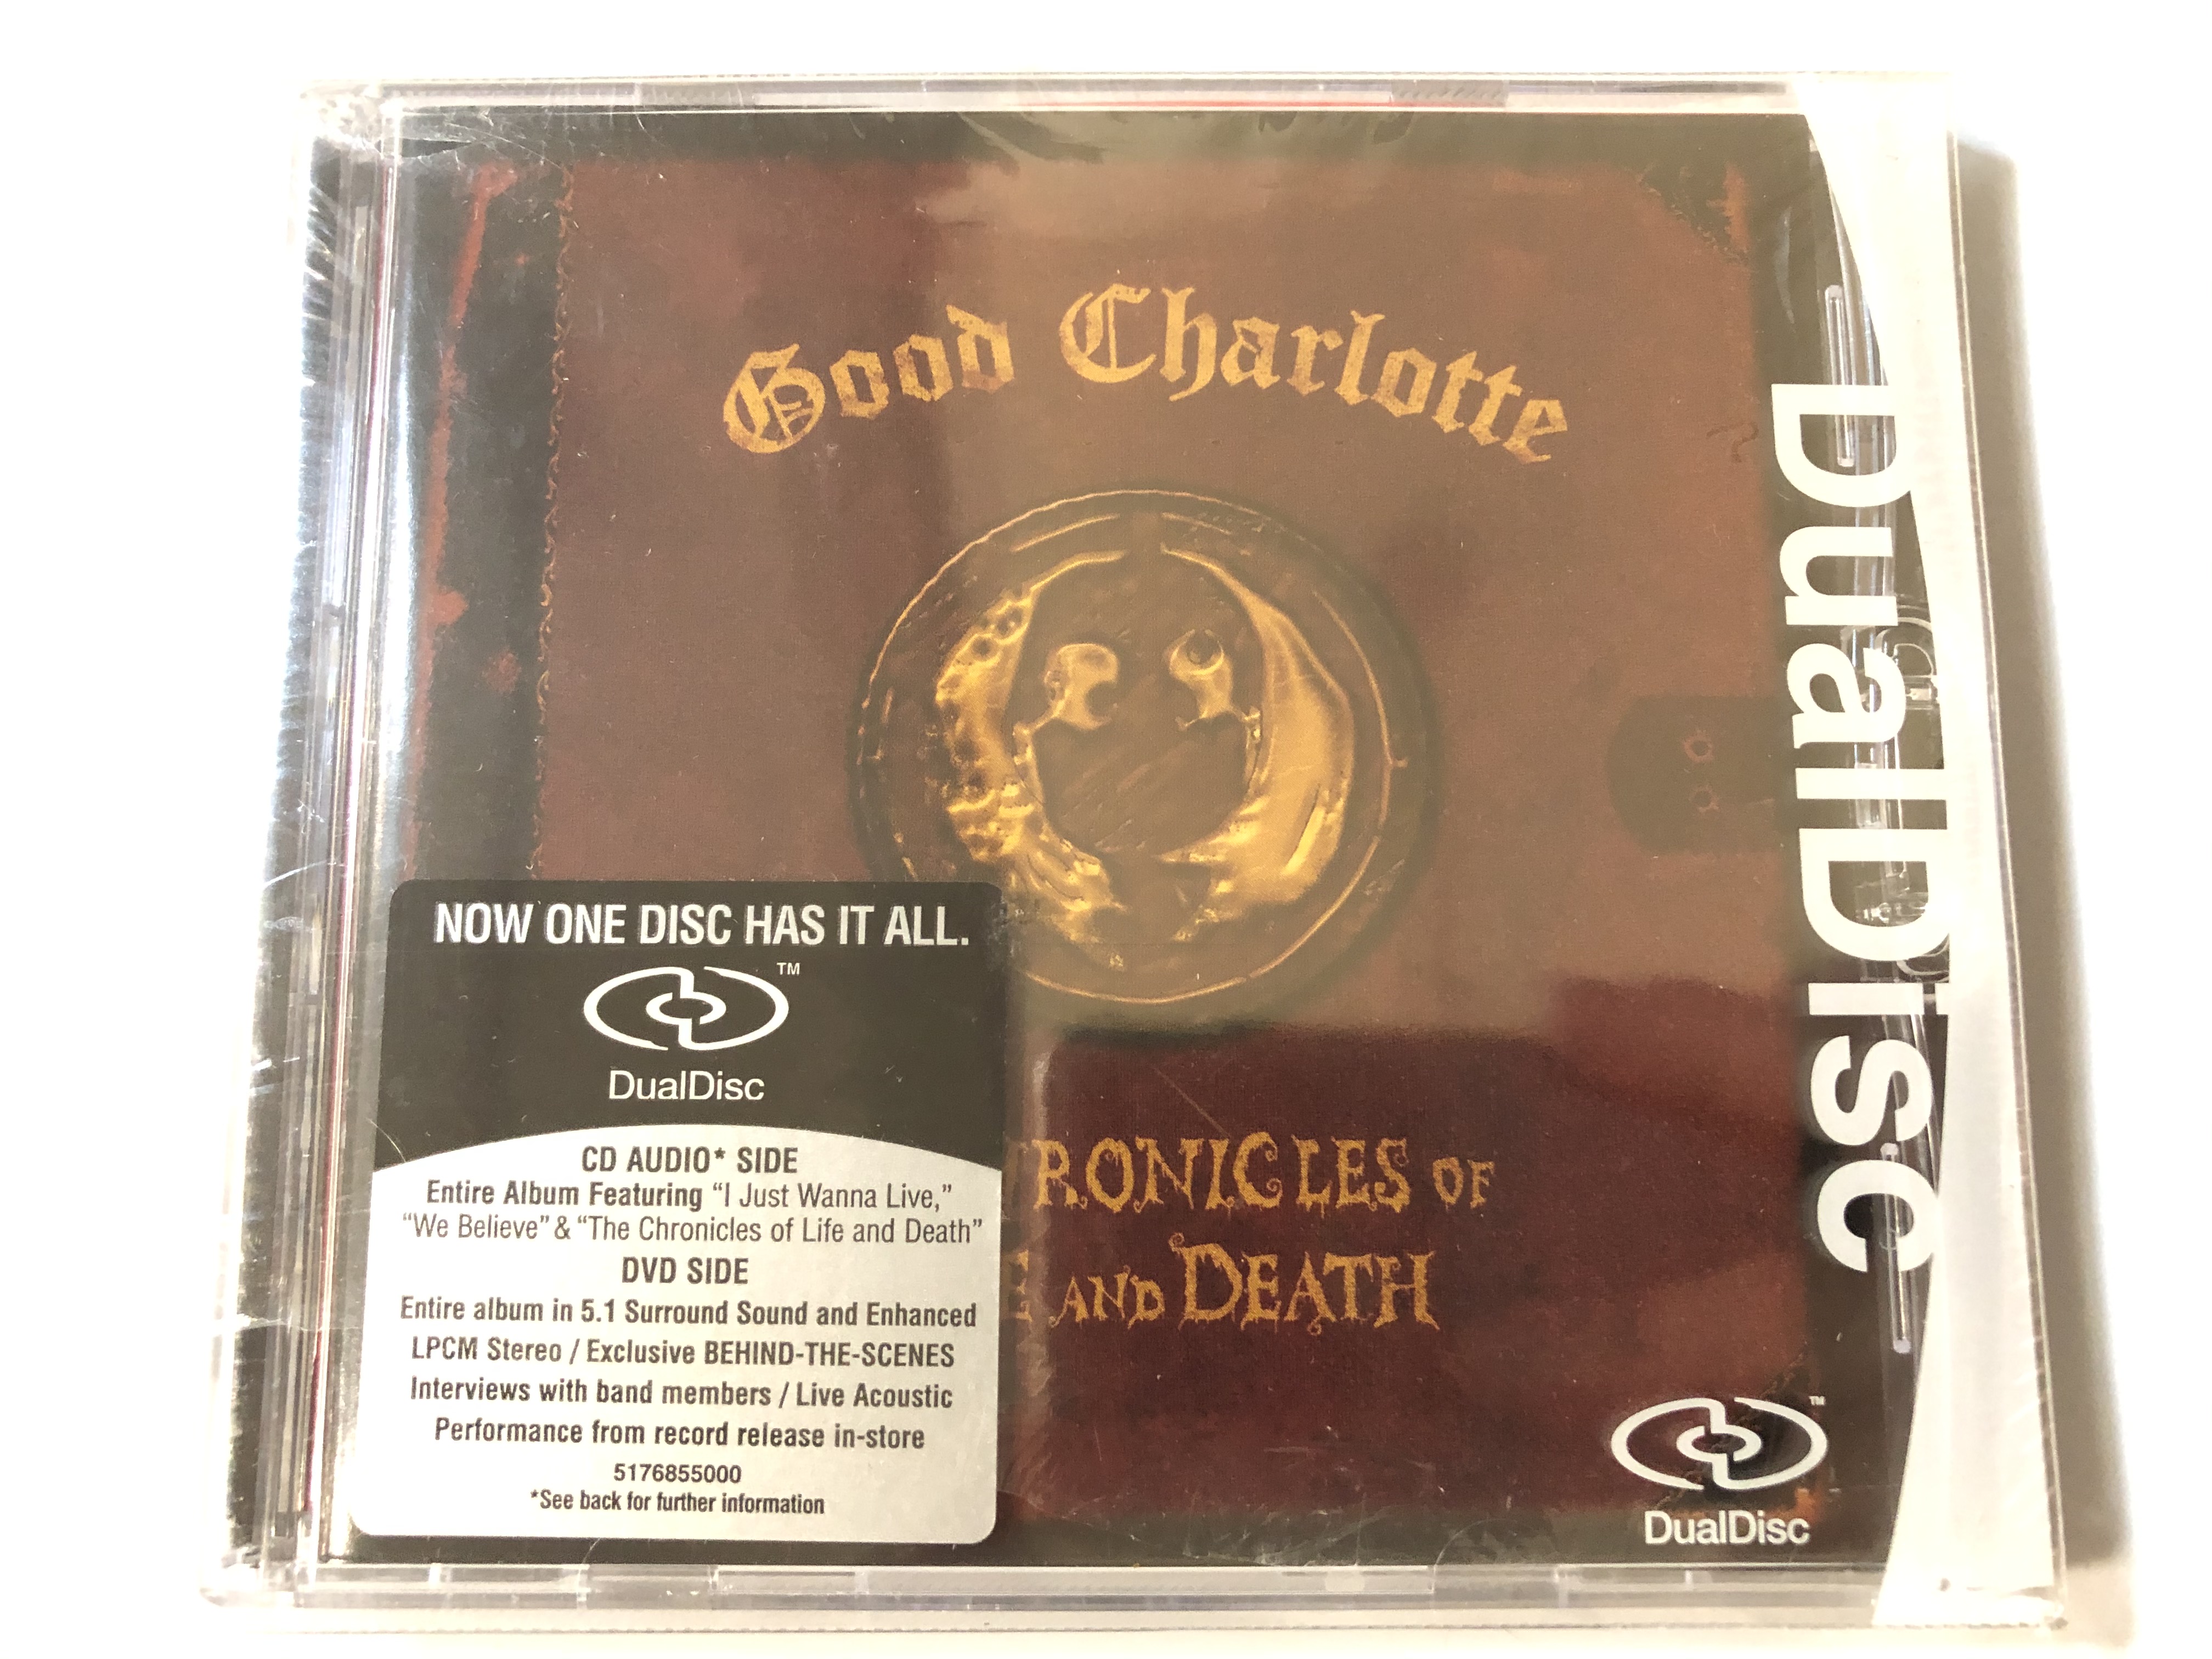 good-charlotte-the-chronicles-of-life-and-death-dual-disc-cd-audio-side-entire-album-featuring-i-just-wanna-live-we-believe-the-chronicles-of-life-and-death-dvd-side-e-1-.jpg